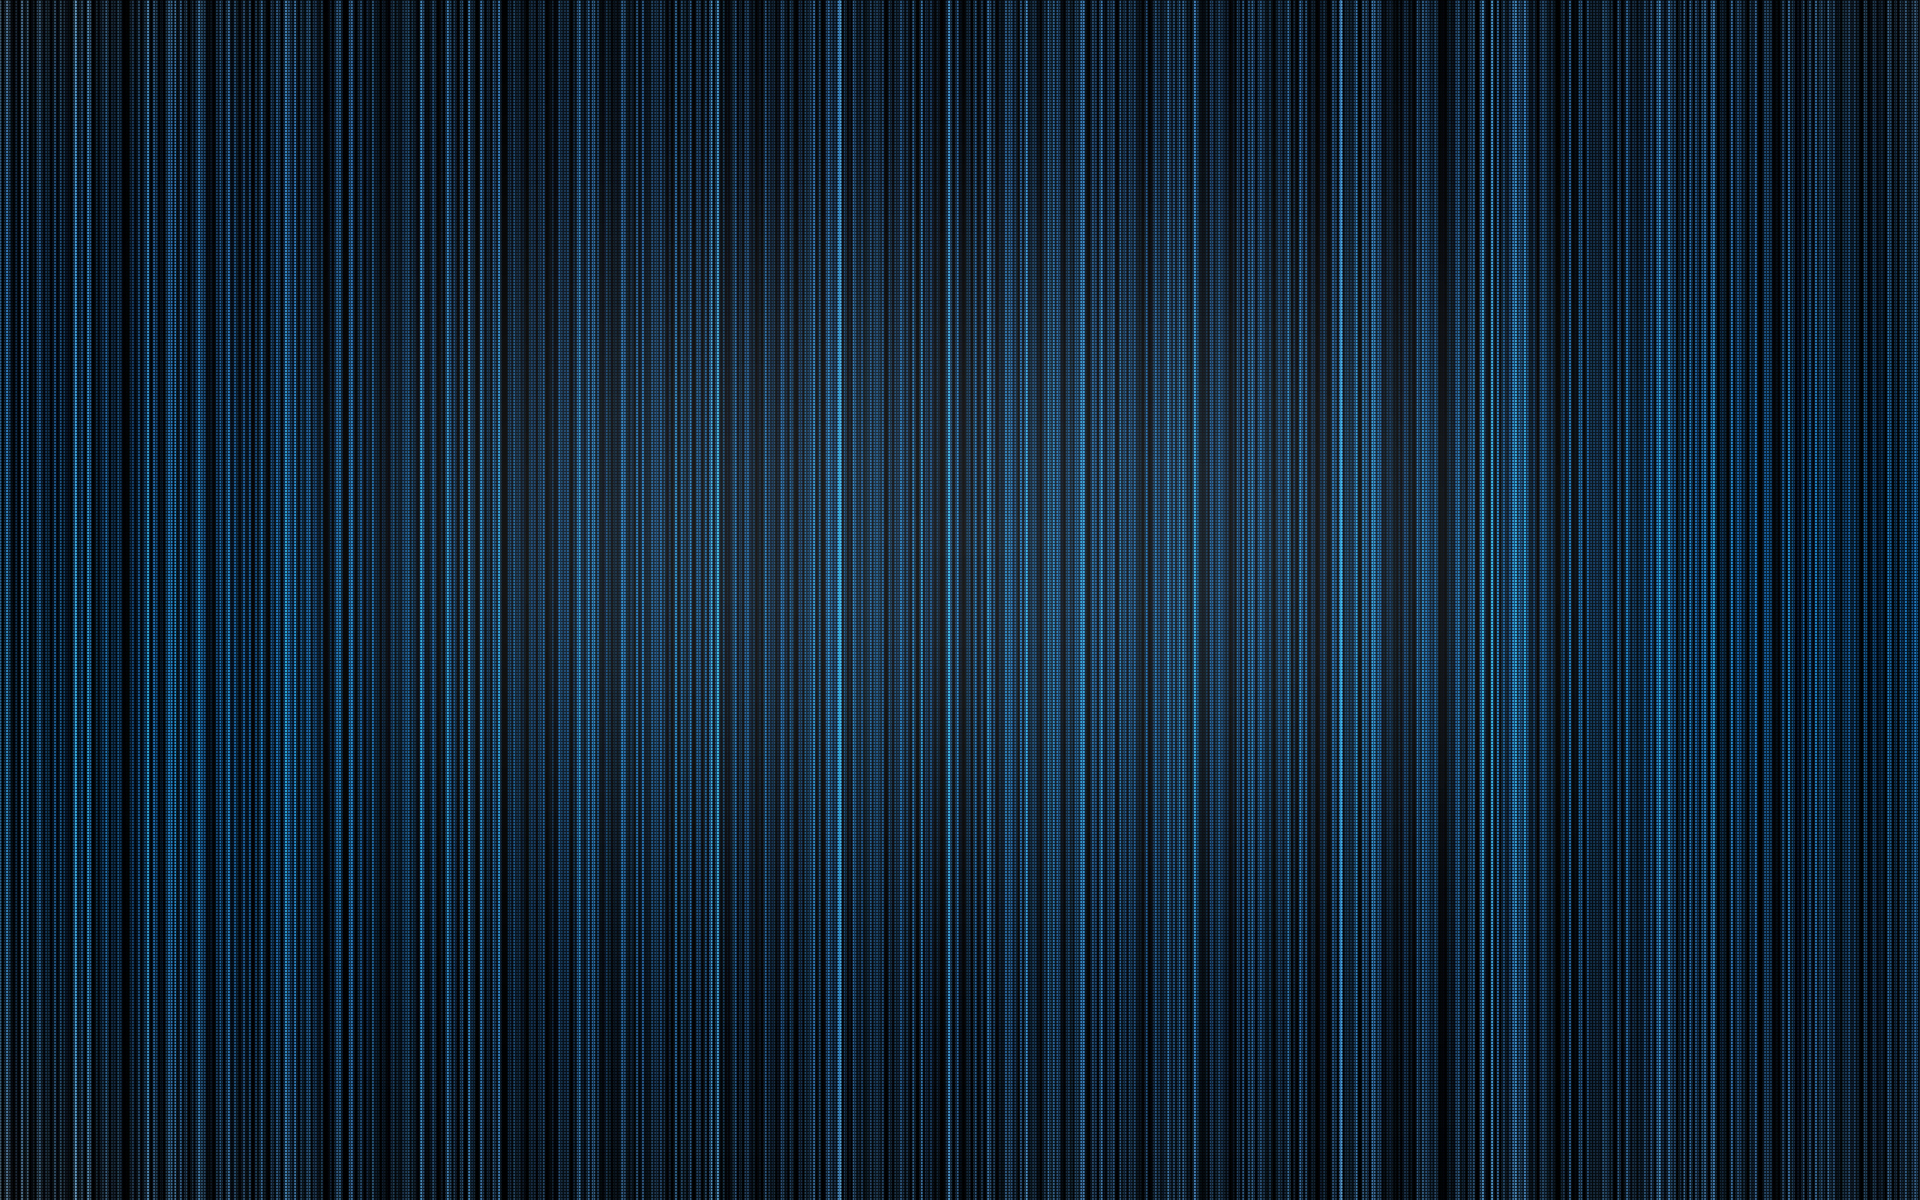 Download Colorful Lining Hd Material Background | Wallpapers.com